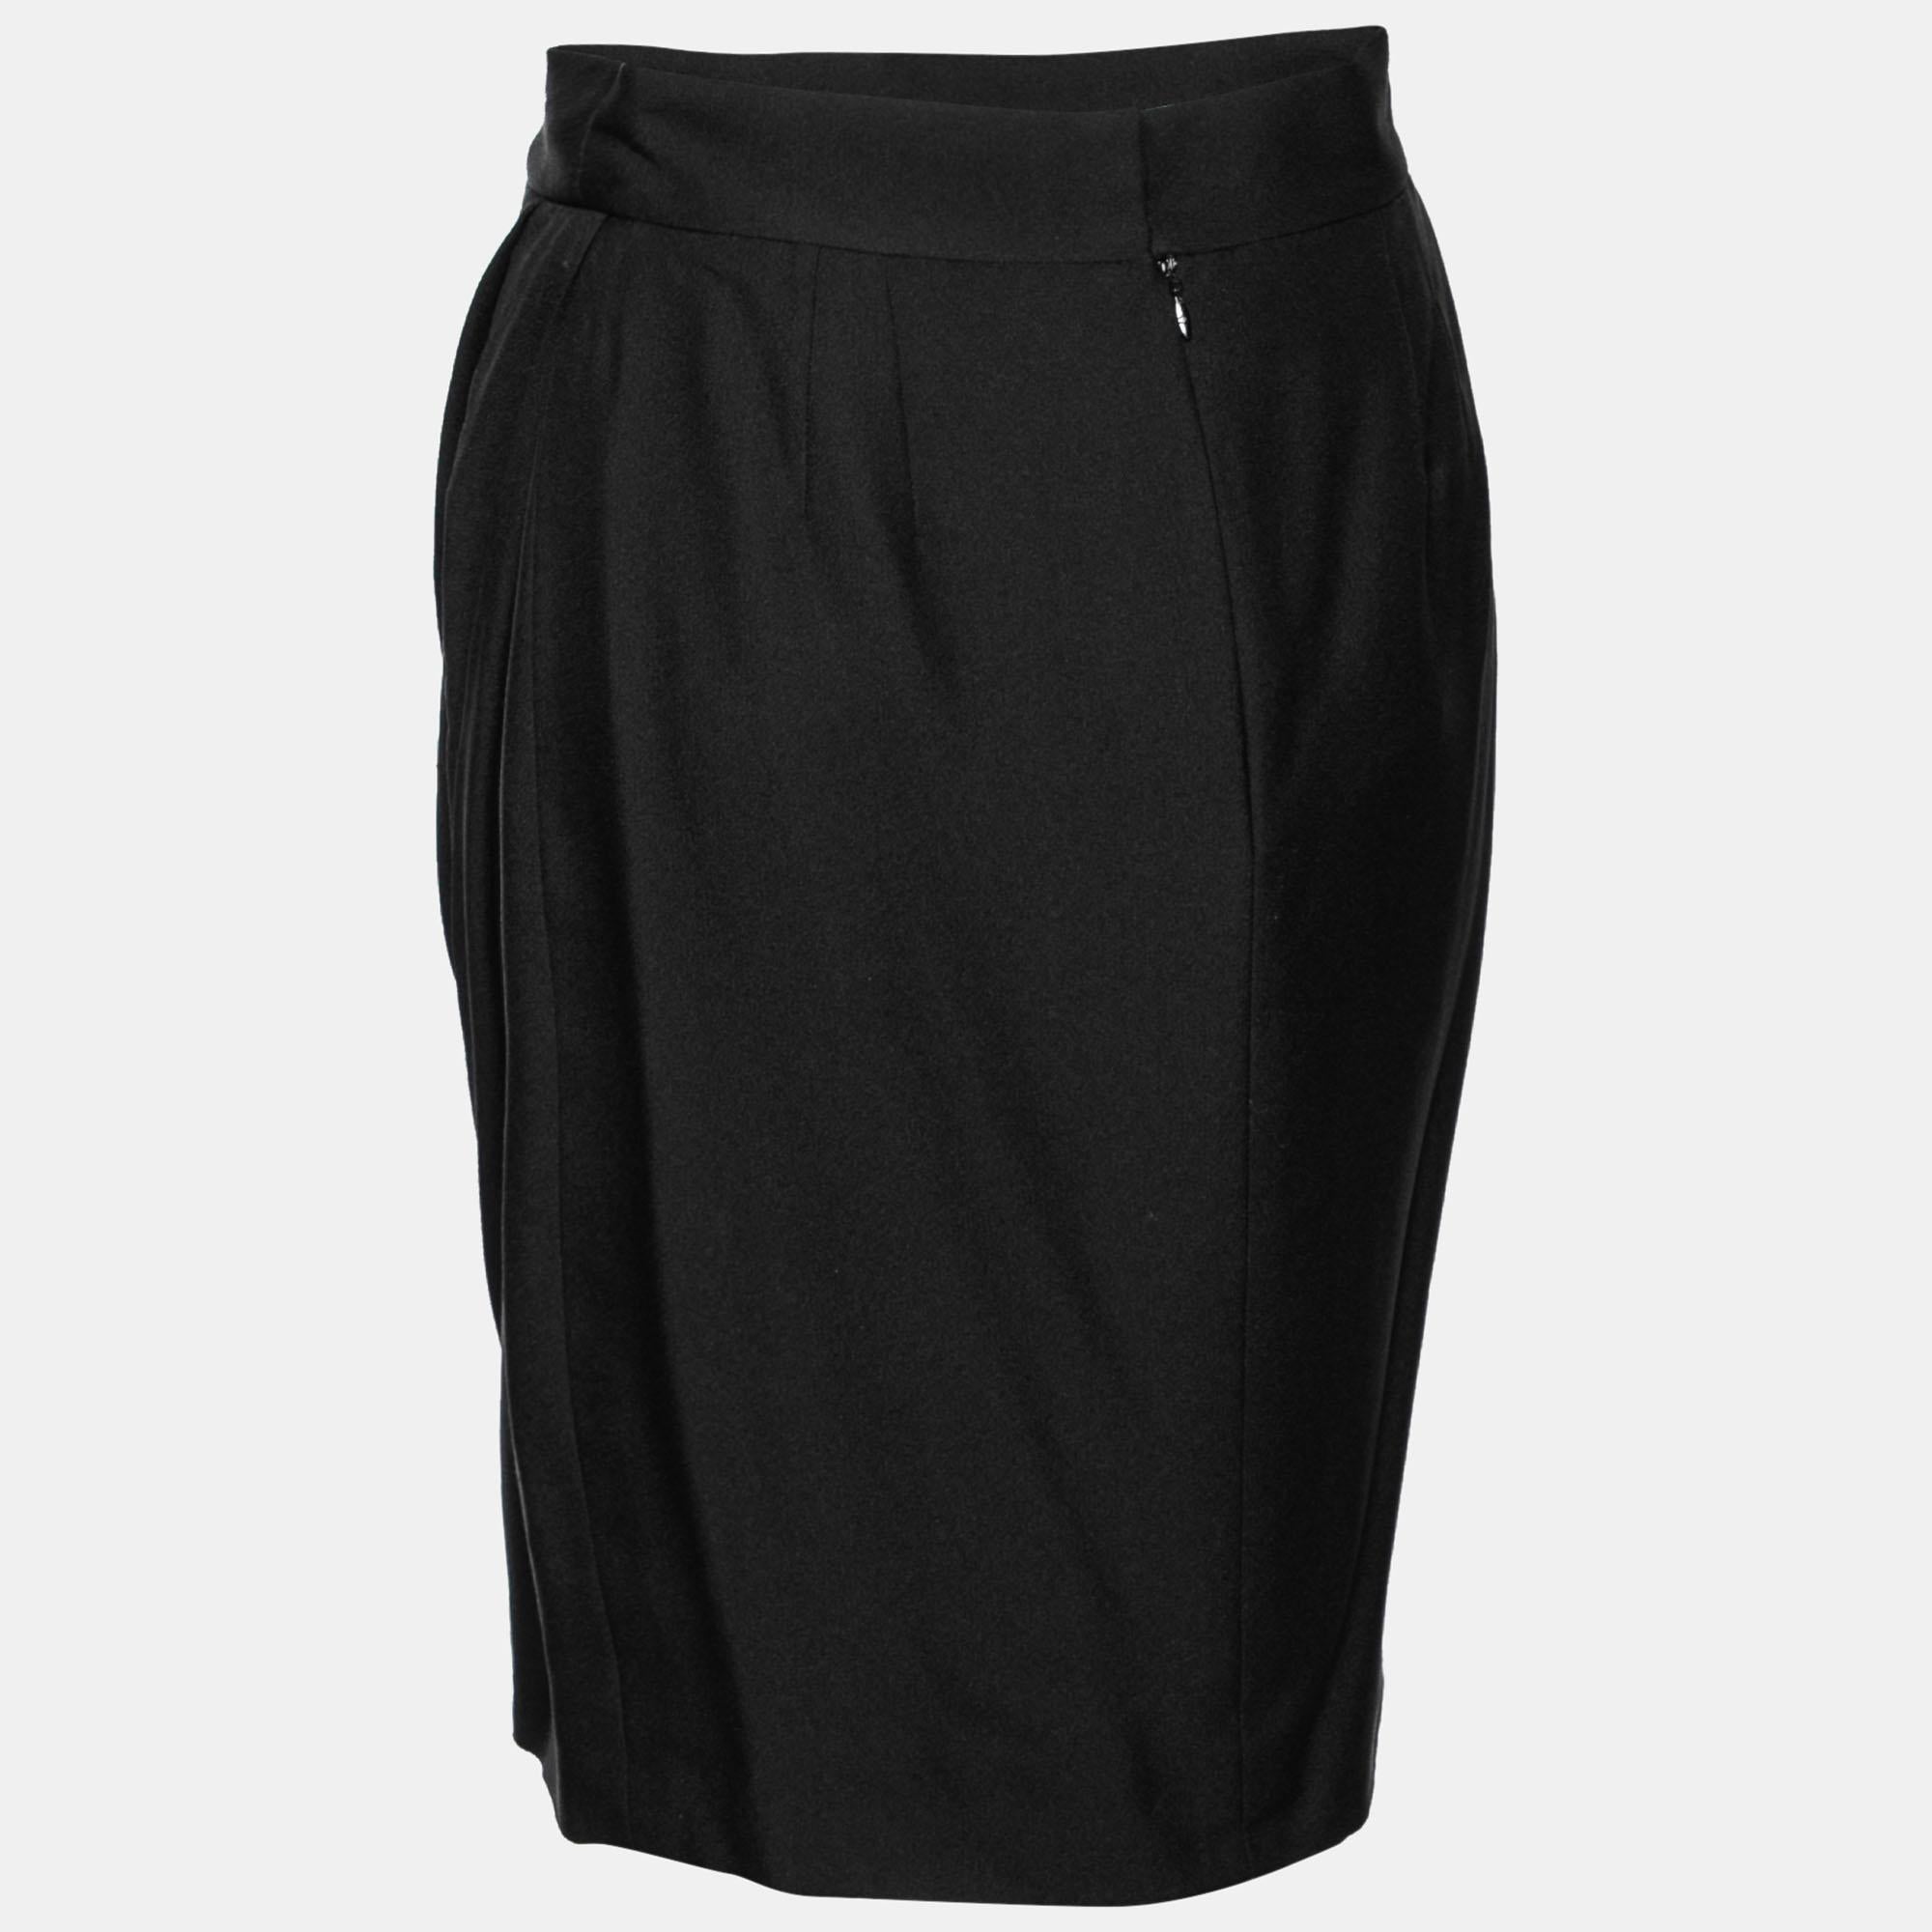 Amp up your style quotient with this skirt from the House of Chanel. Cut from black silk crepe fabric, this skirt flaunts draped formations and a zip-type fastening. Complement this gorgeous Chanel skirt with a chic blouse and matching heels for a